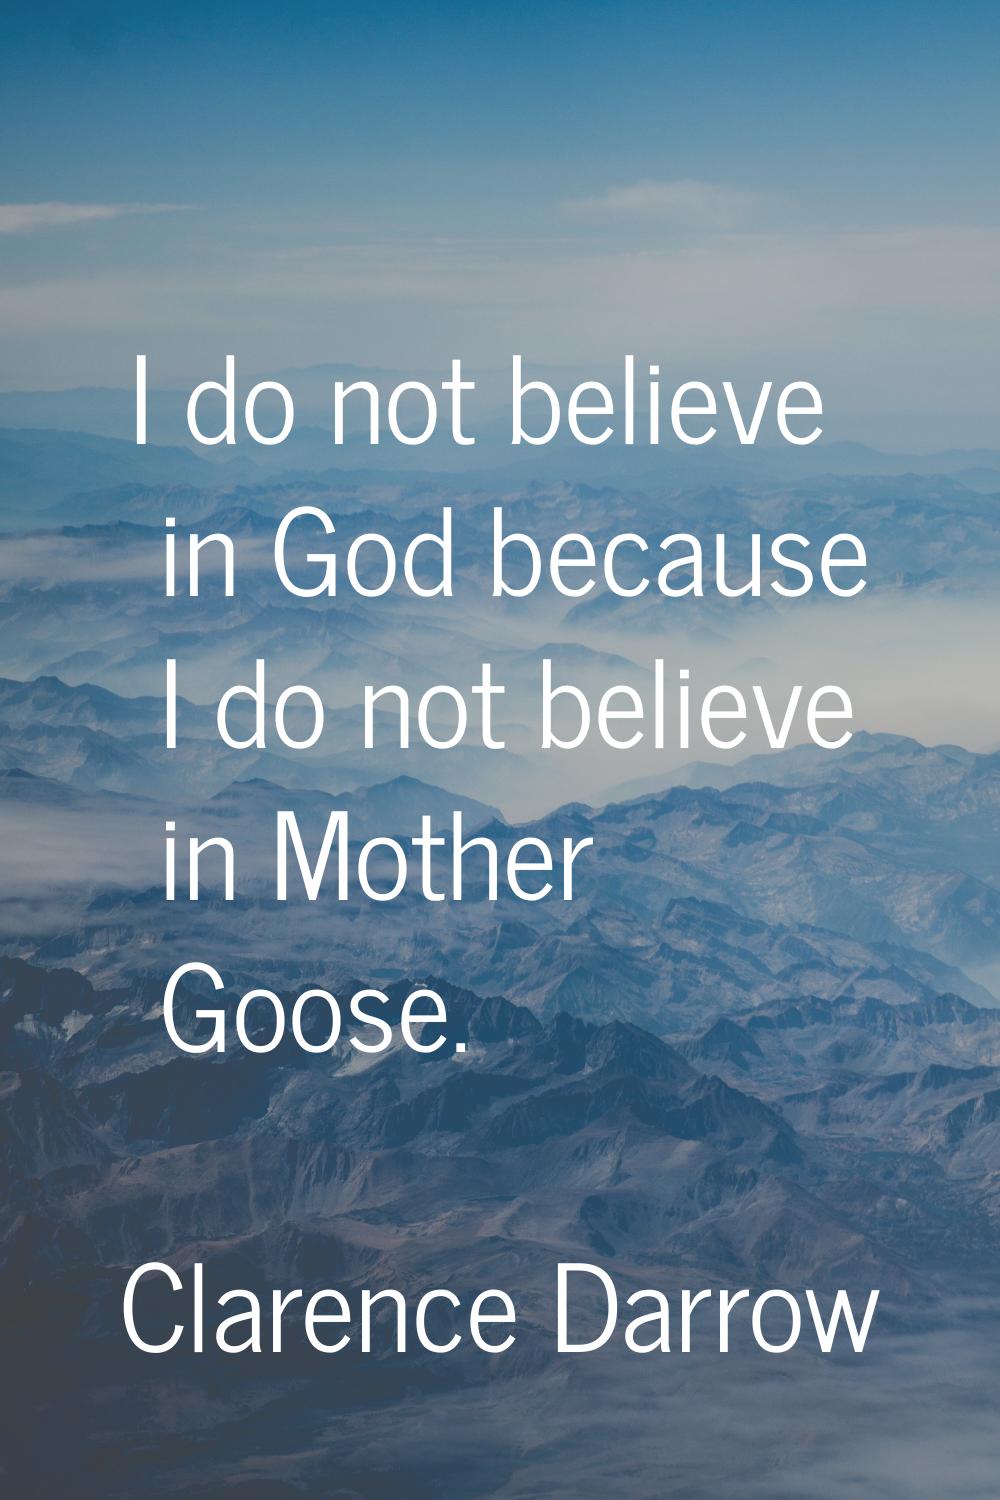 I do not believe in God because I do not believe in Mother Goose.